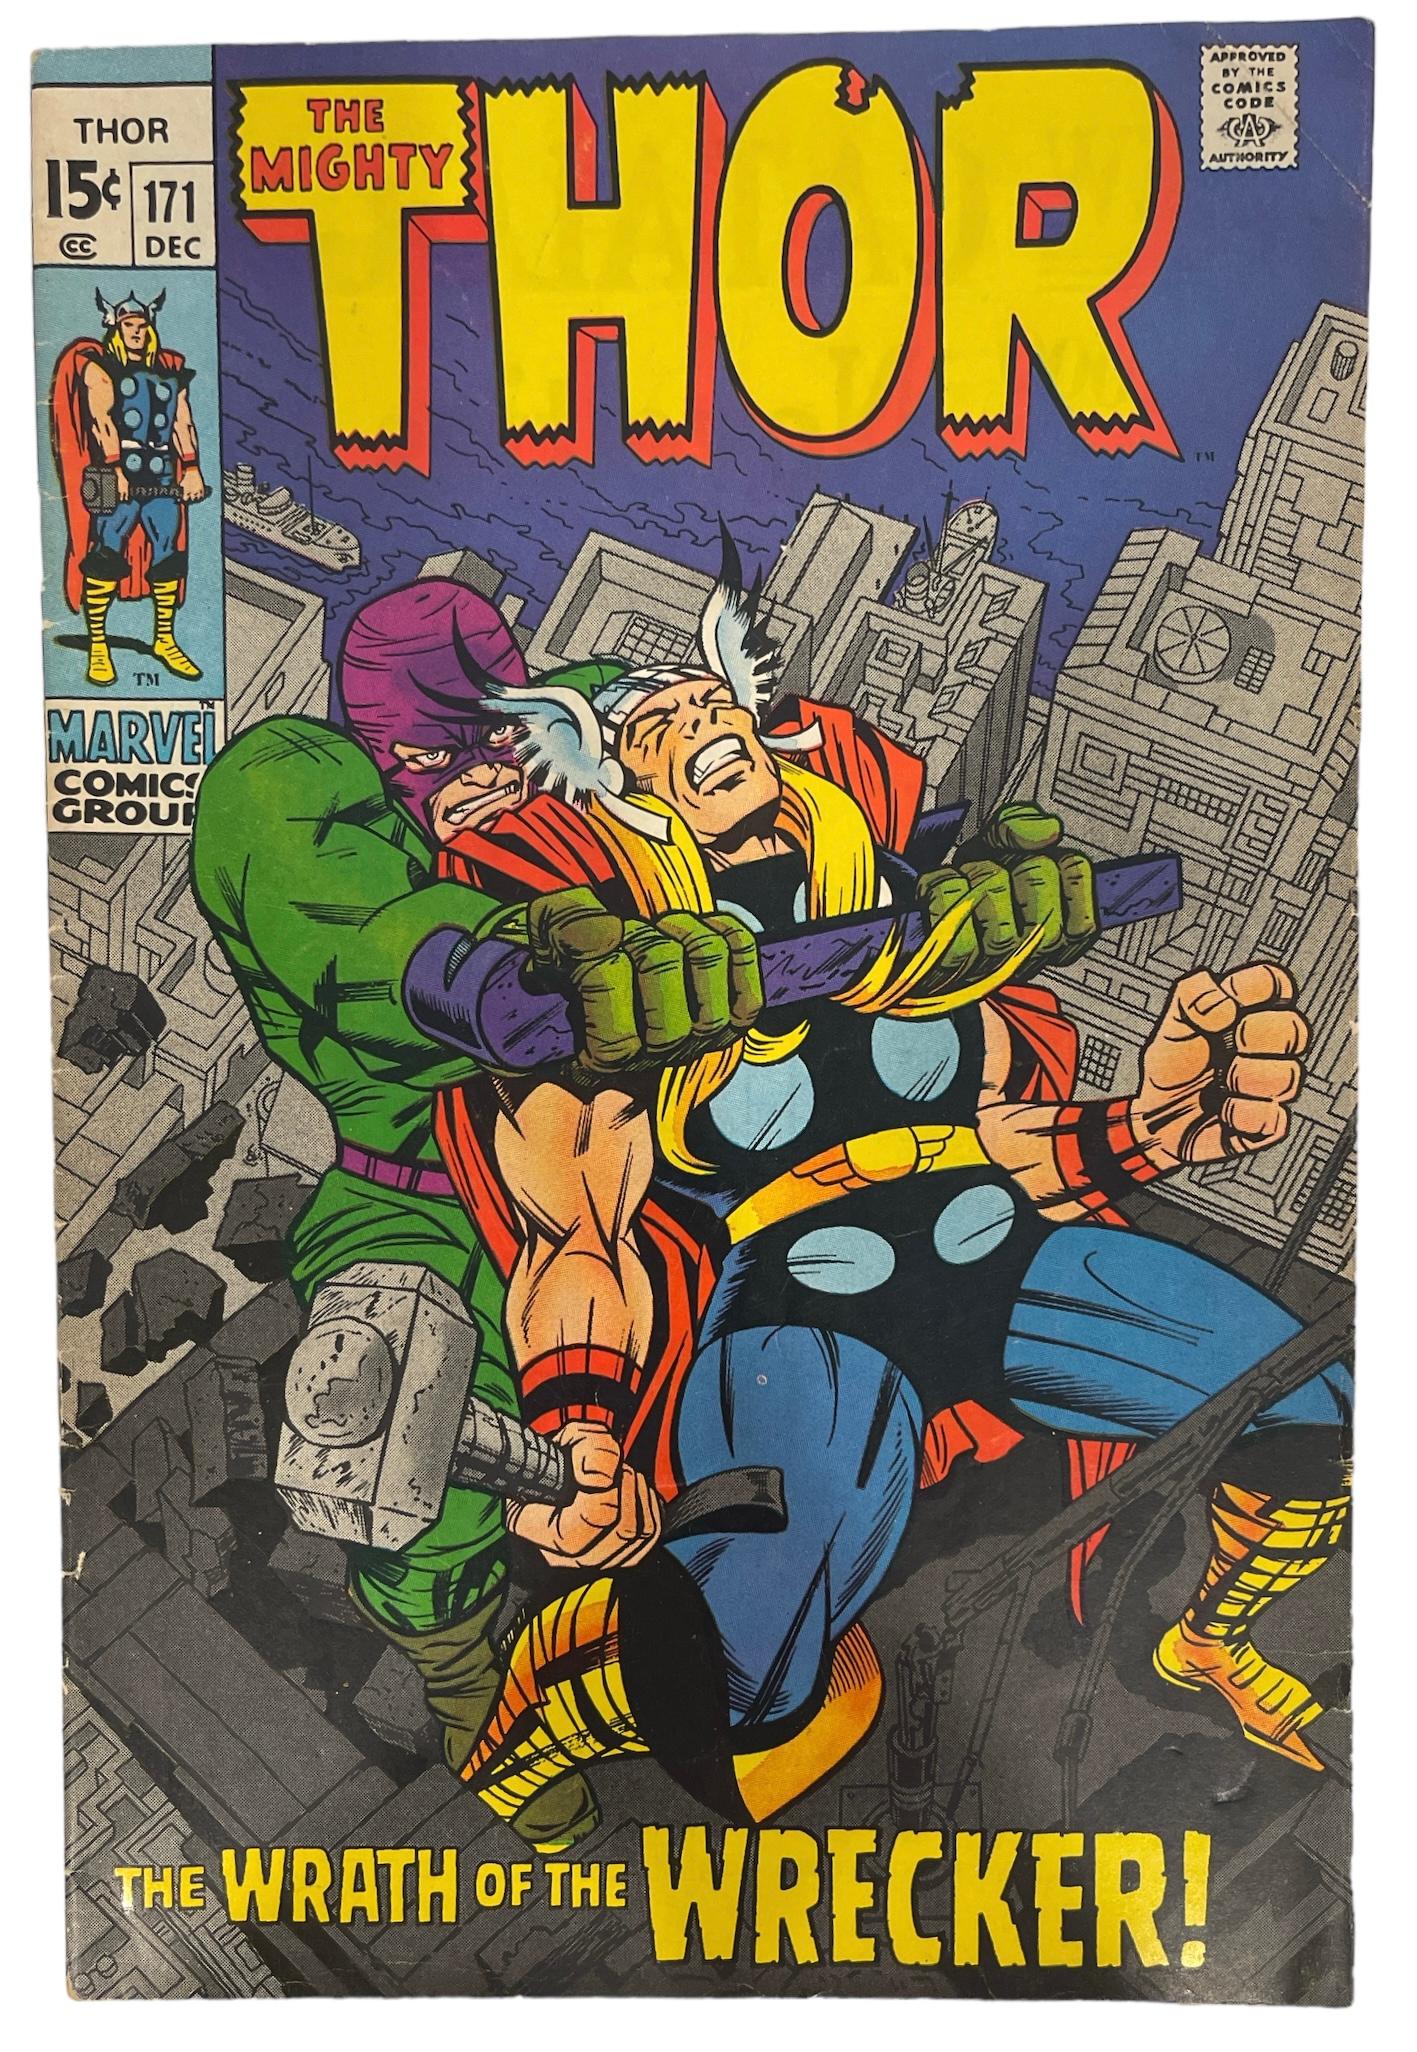 Vintage Marvel Comics - The Mighty Thor No.171 and No.157